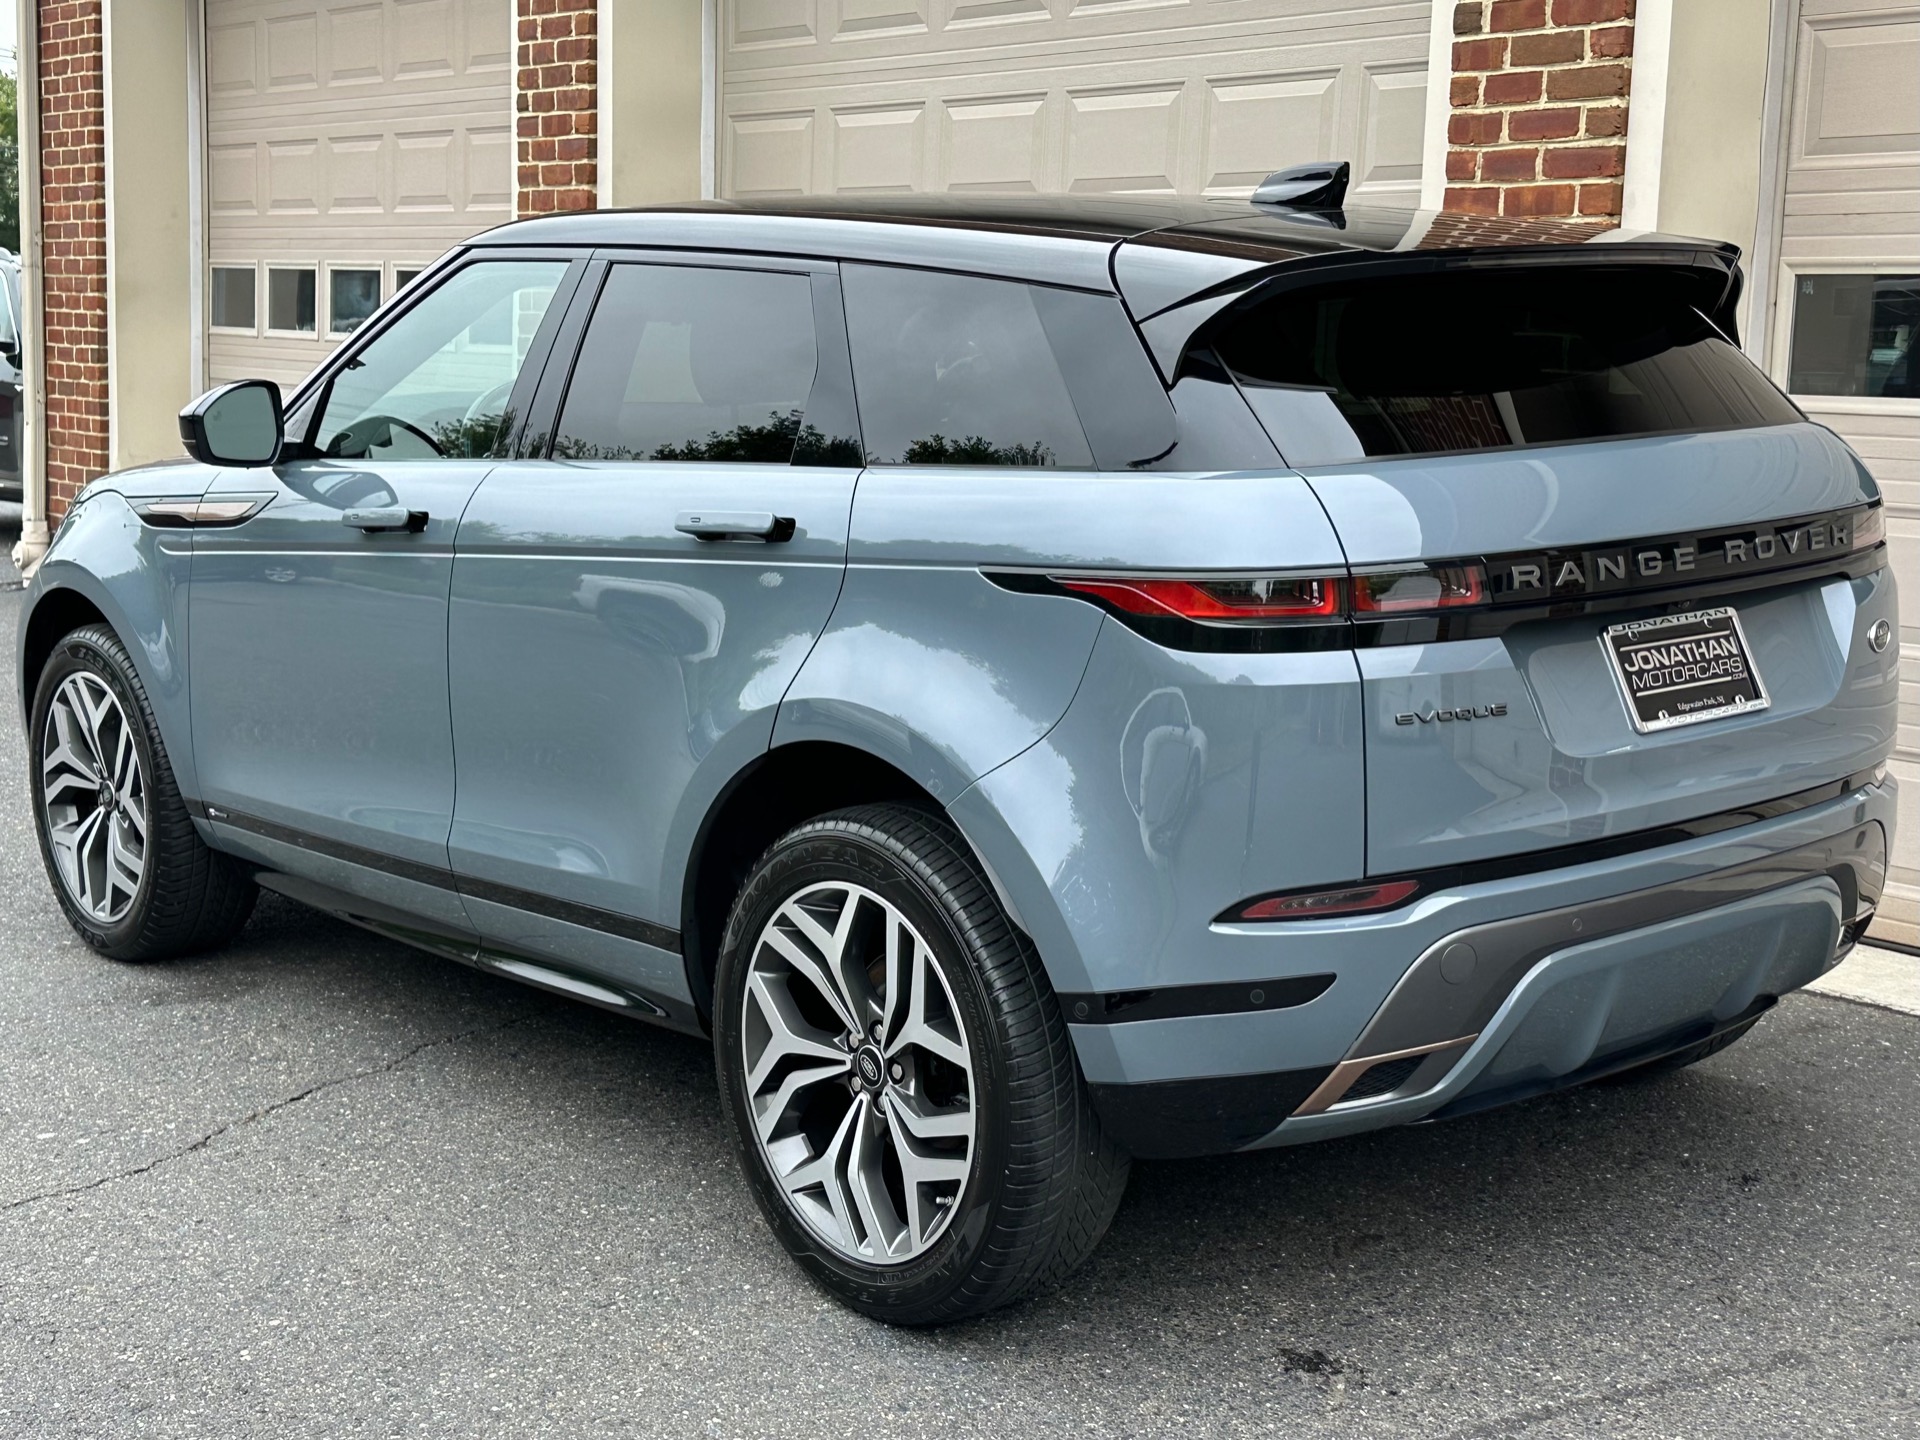 Used-2020-Land-Rover-Range-Rover-Evoque-First-Edition